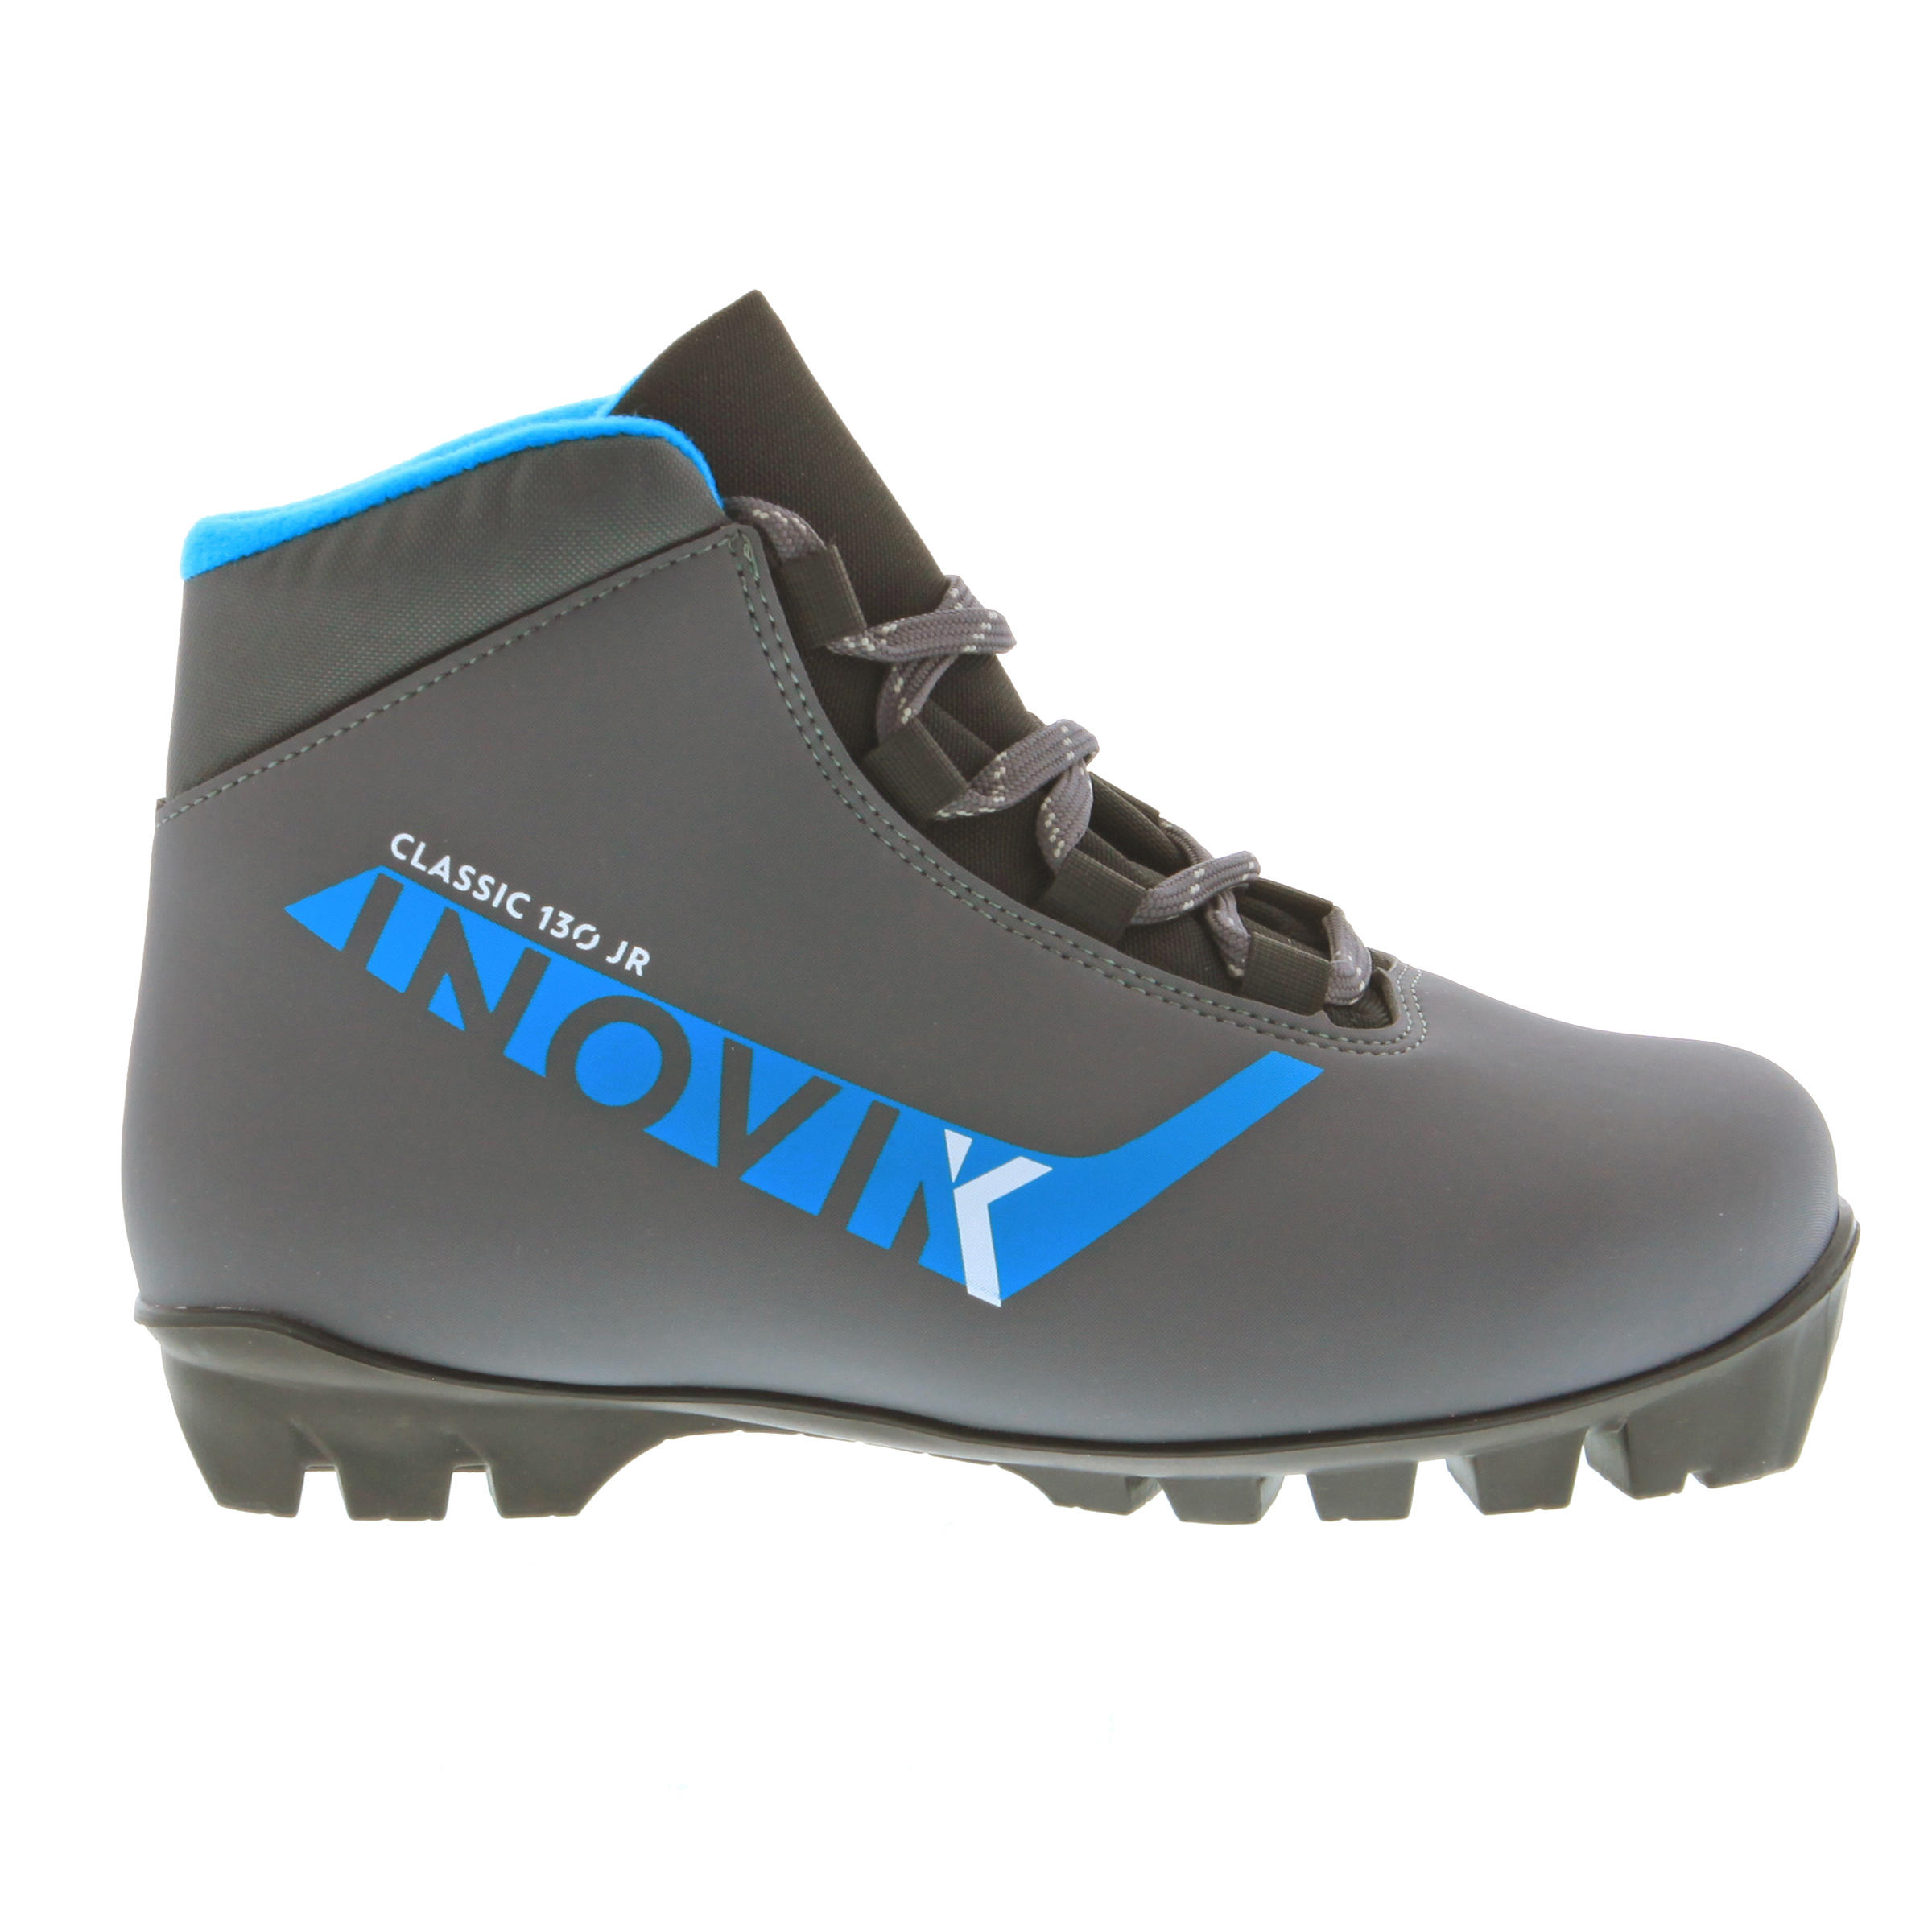 Xc s 130 classic junior cross-country skiing boots - grey 5/7